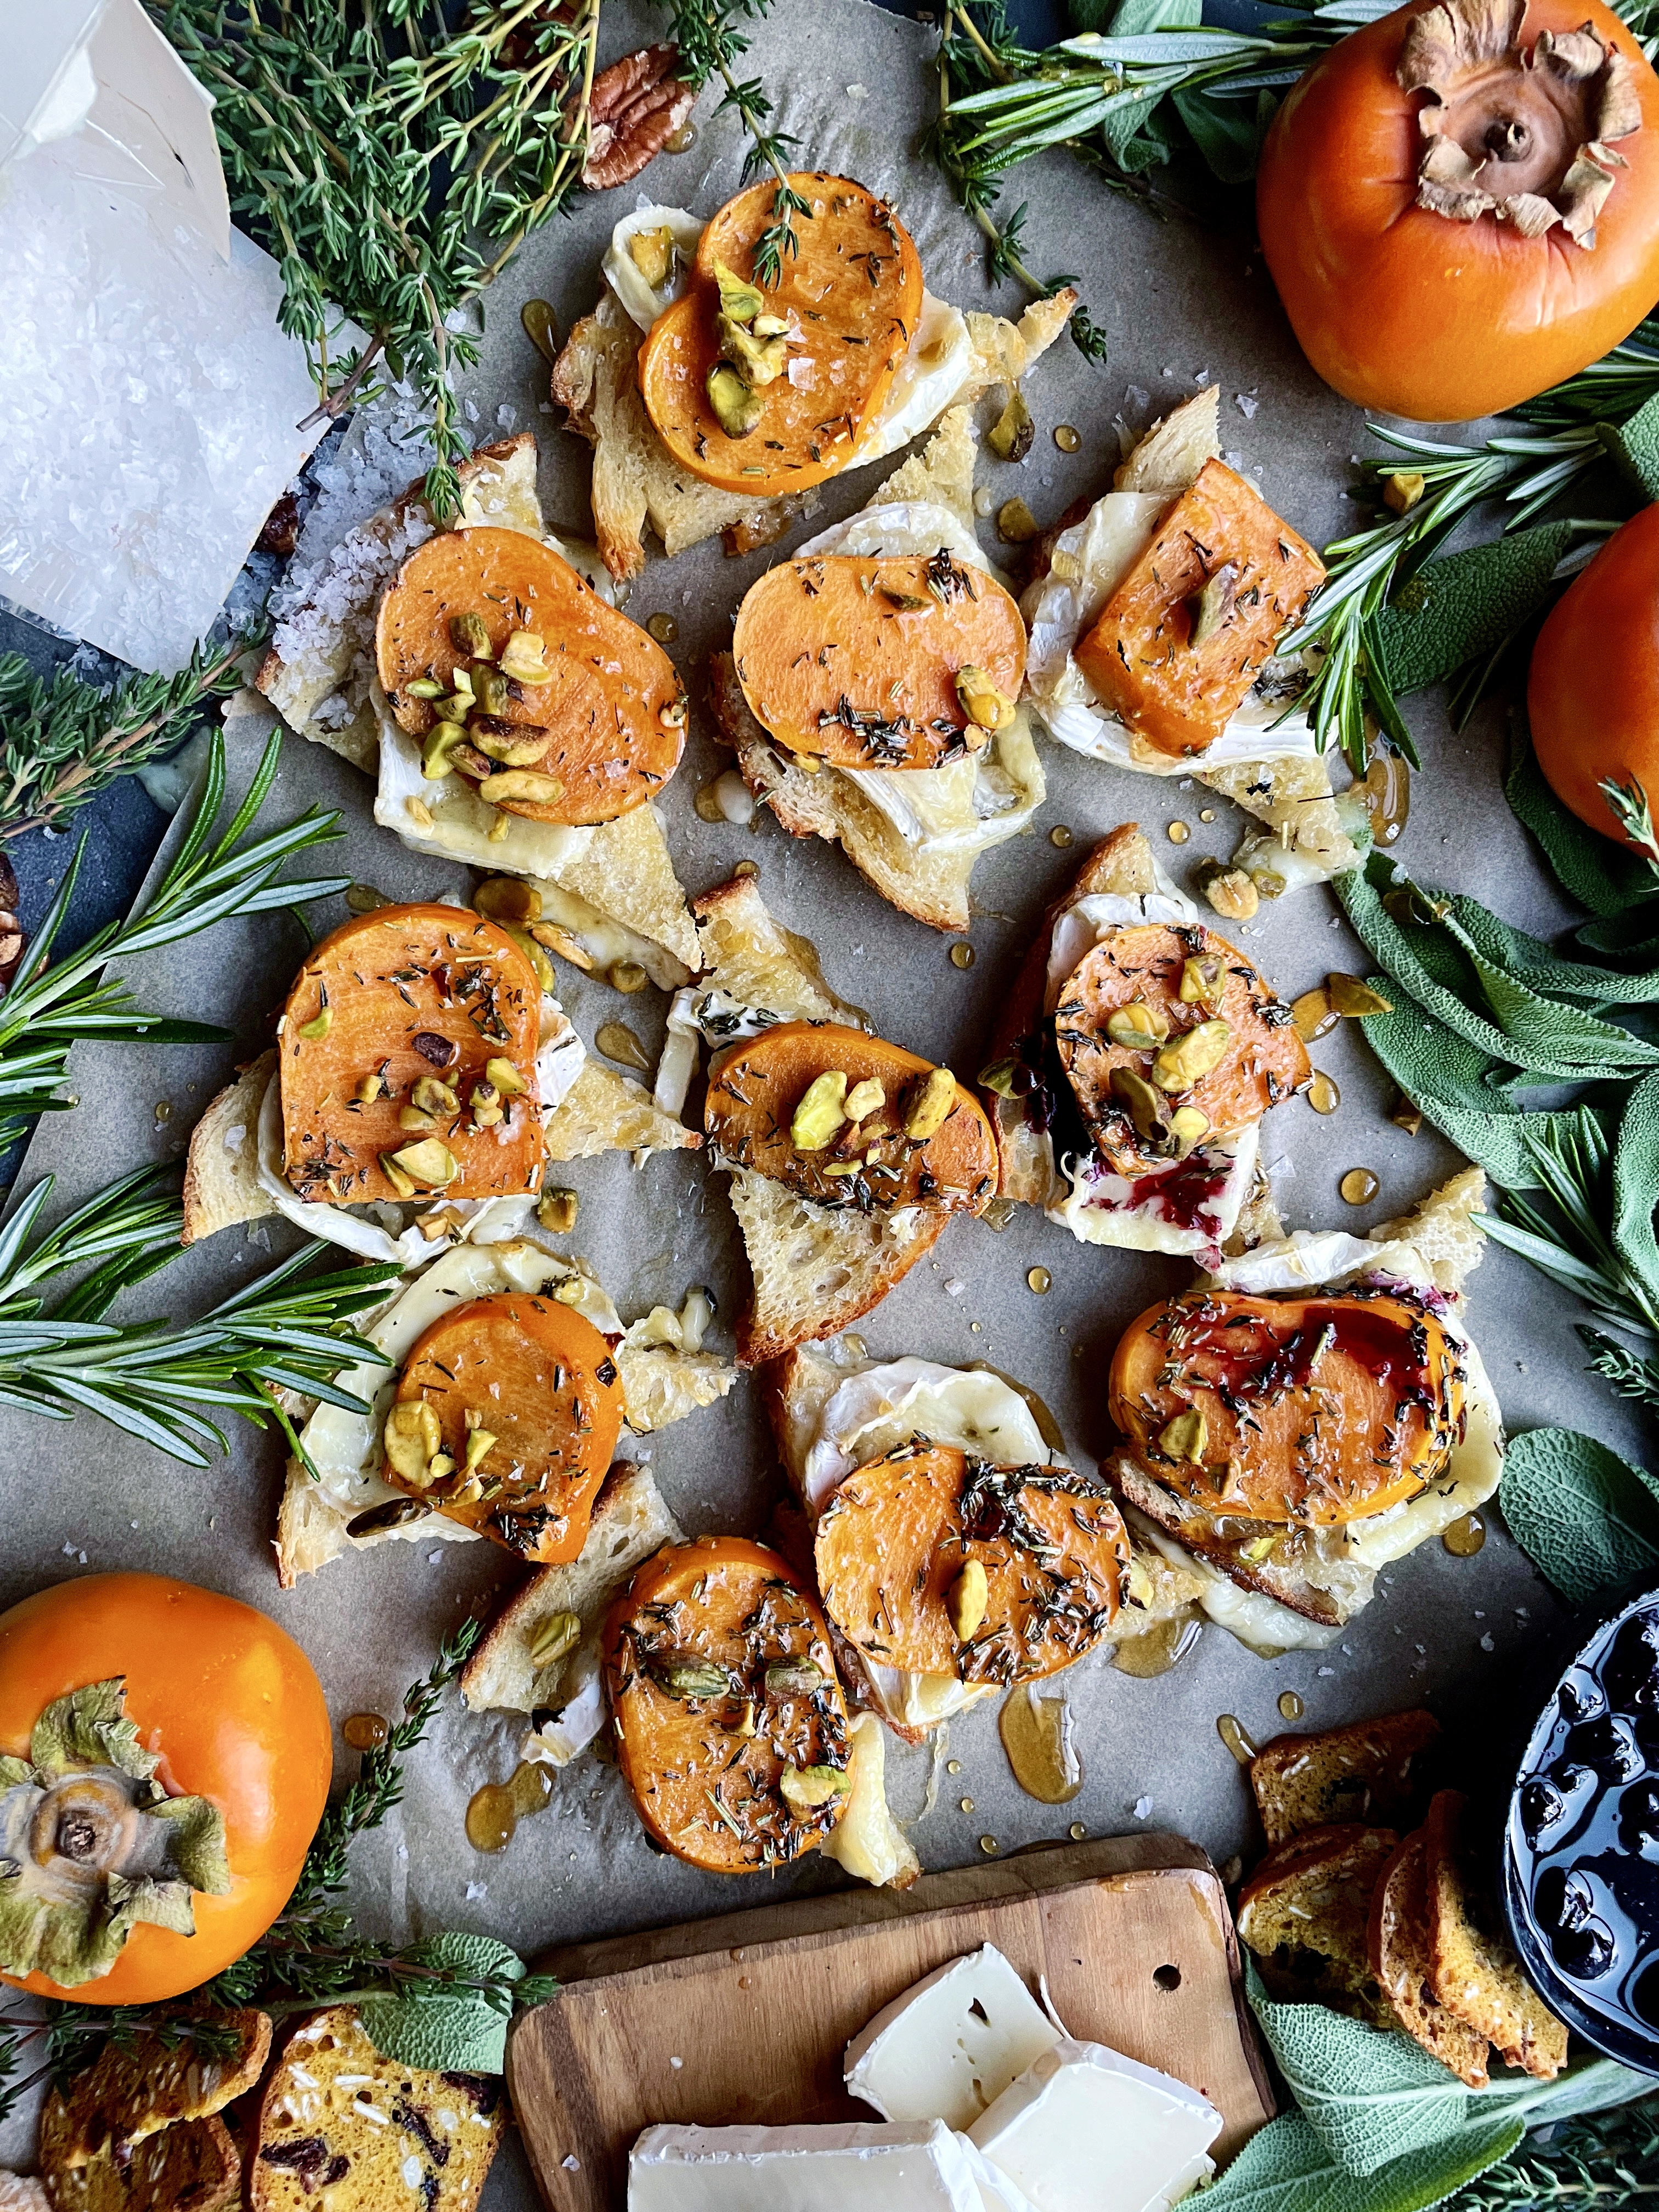 Golden, crispy sourdough toast topped with melty brie and quick marinated persimmons: these Baked Brie Persimmon Tartines are my favorite fall appetizer.